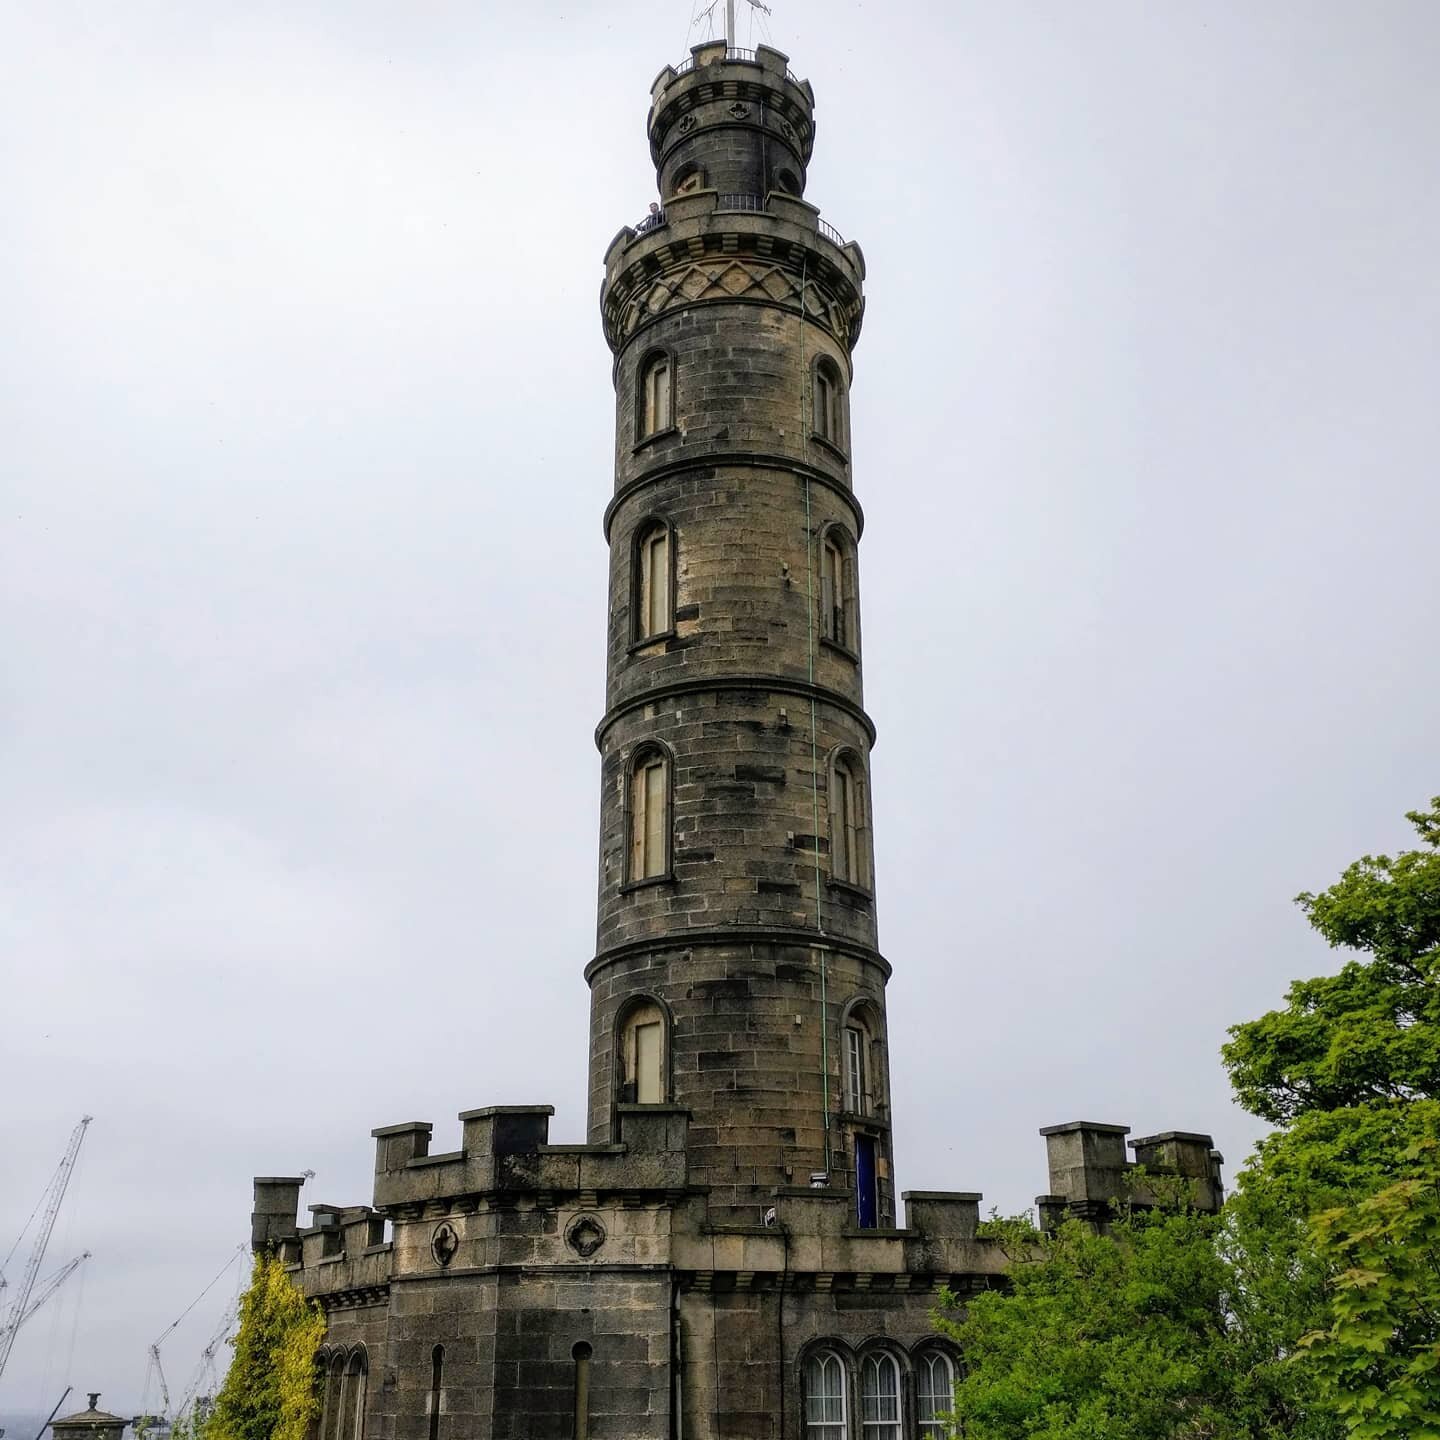 Nelson Monument is a memorial tower in Edinburgh, Scotland. Built between 1807 and 1816, the 32m tower is situated on top of Carlton Hill. The original design was a Pagoda-style prepared by Alexander Nasmyth, but it was deemed too expensive. At the t